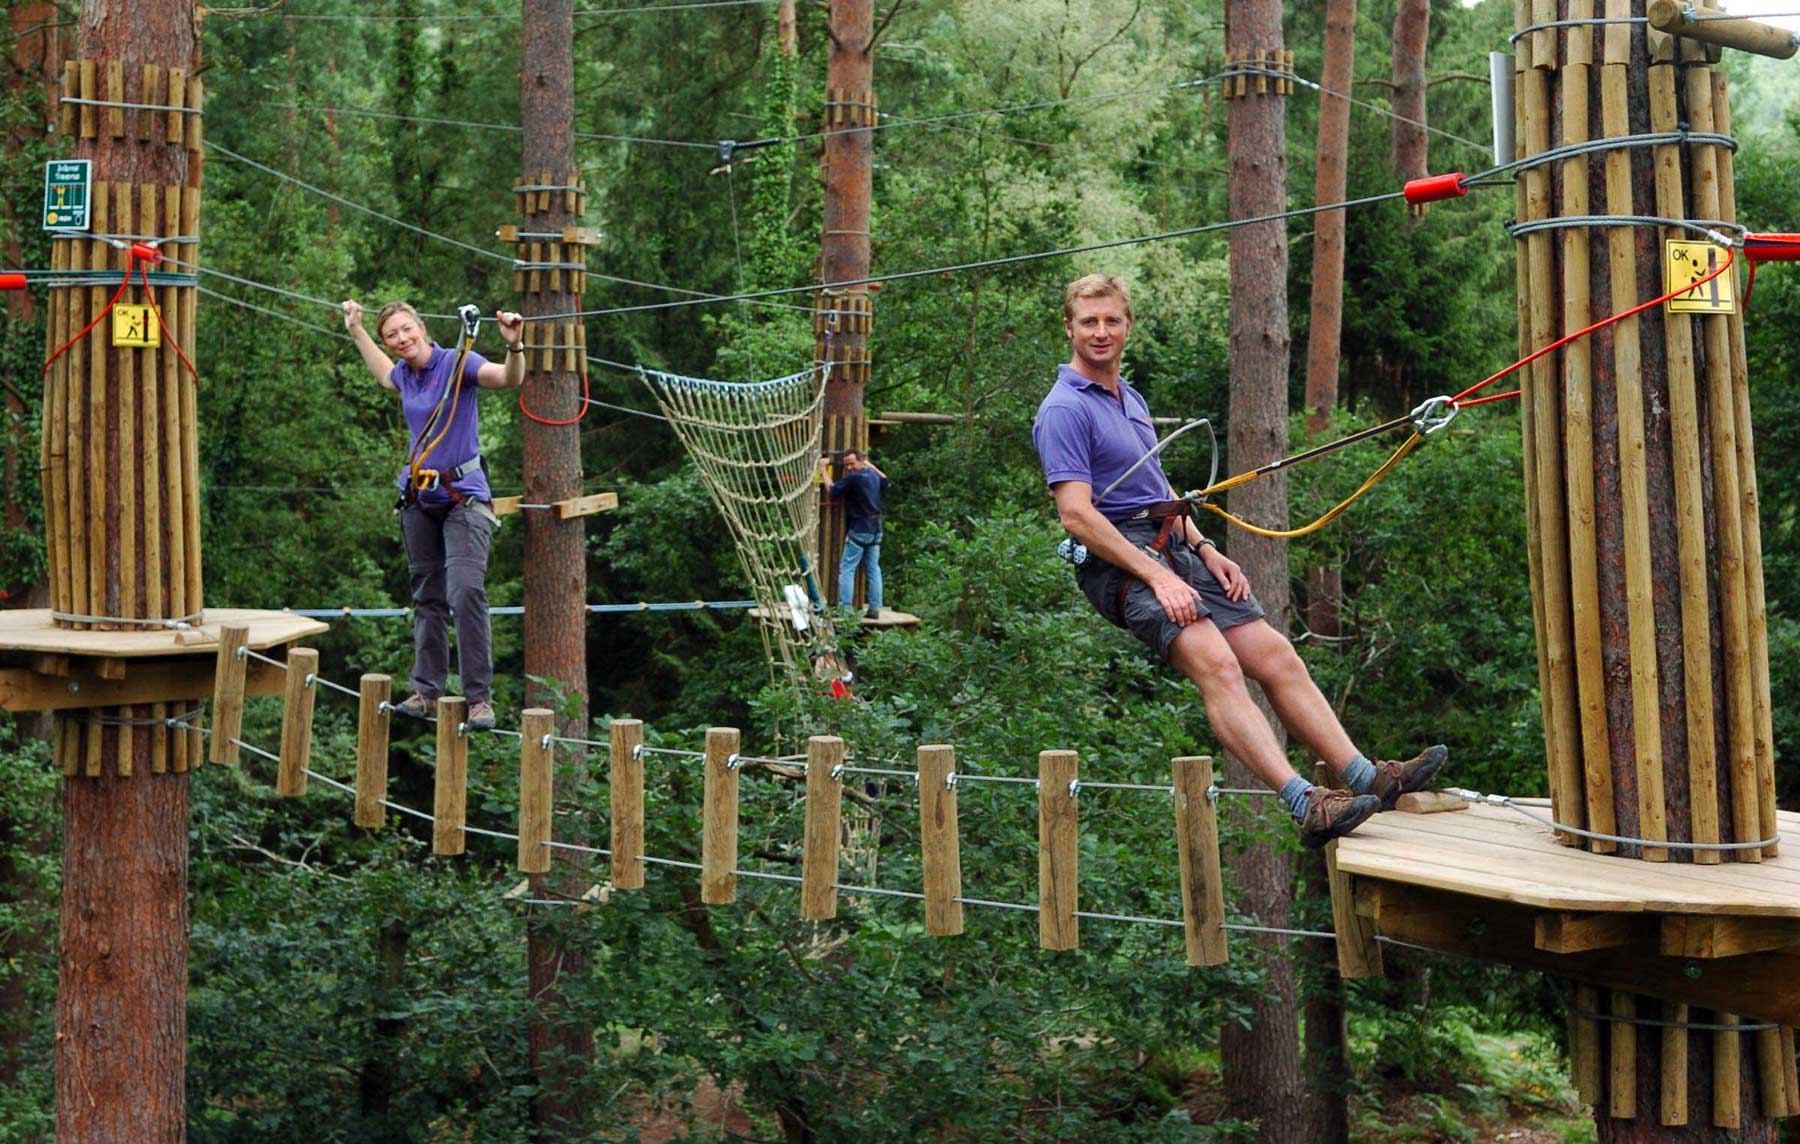 Go Ape - two people on a high wire assault course